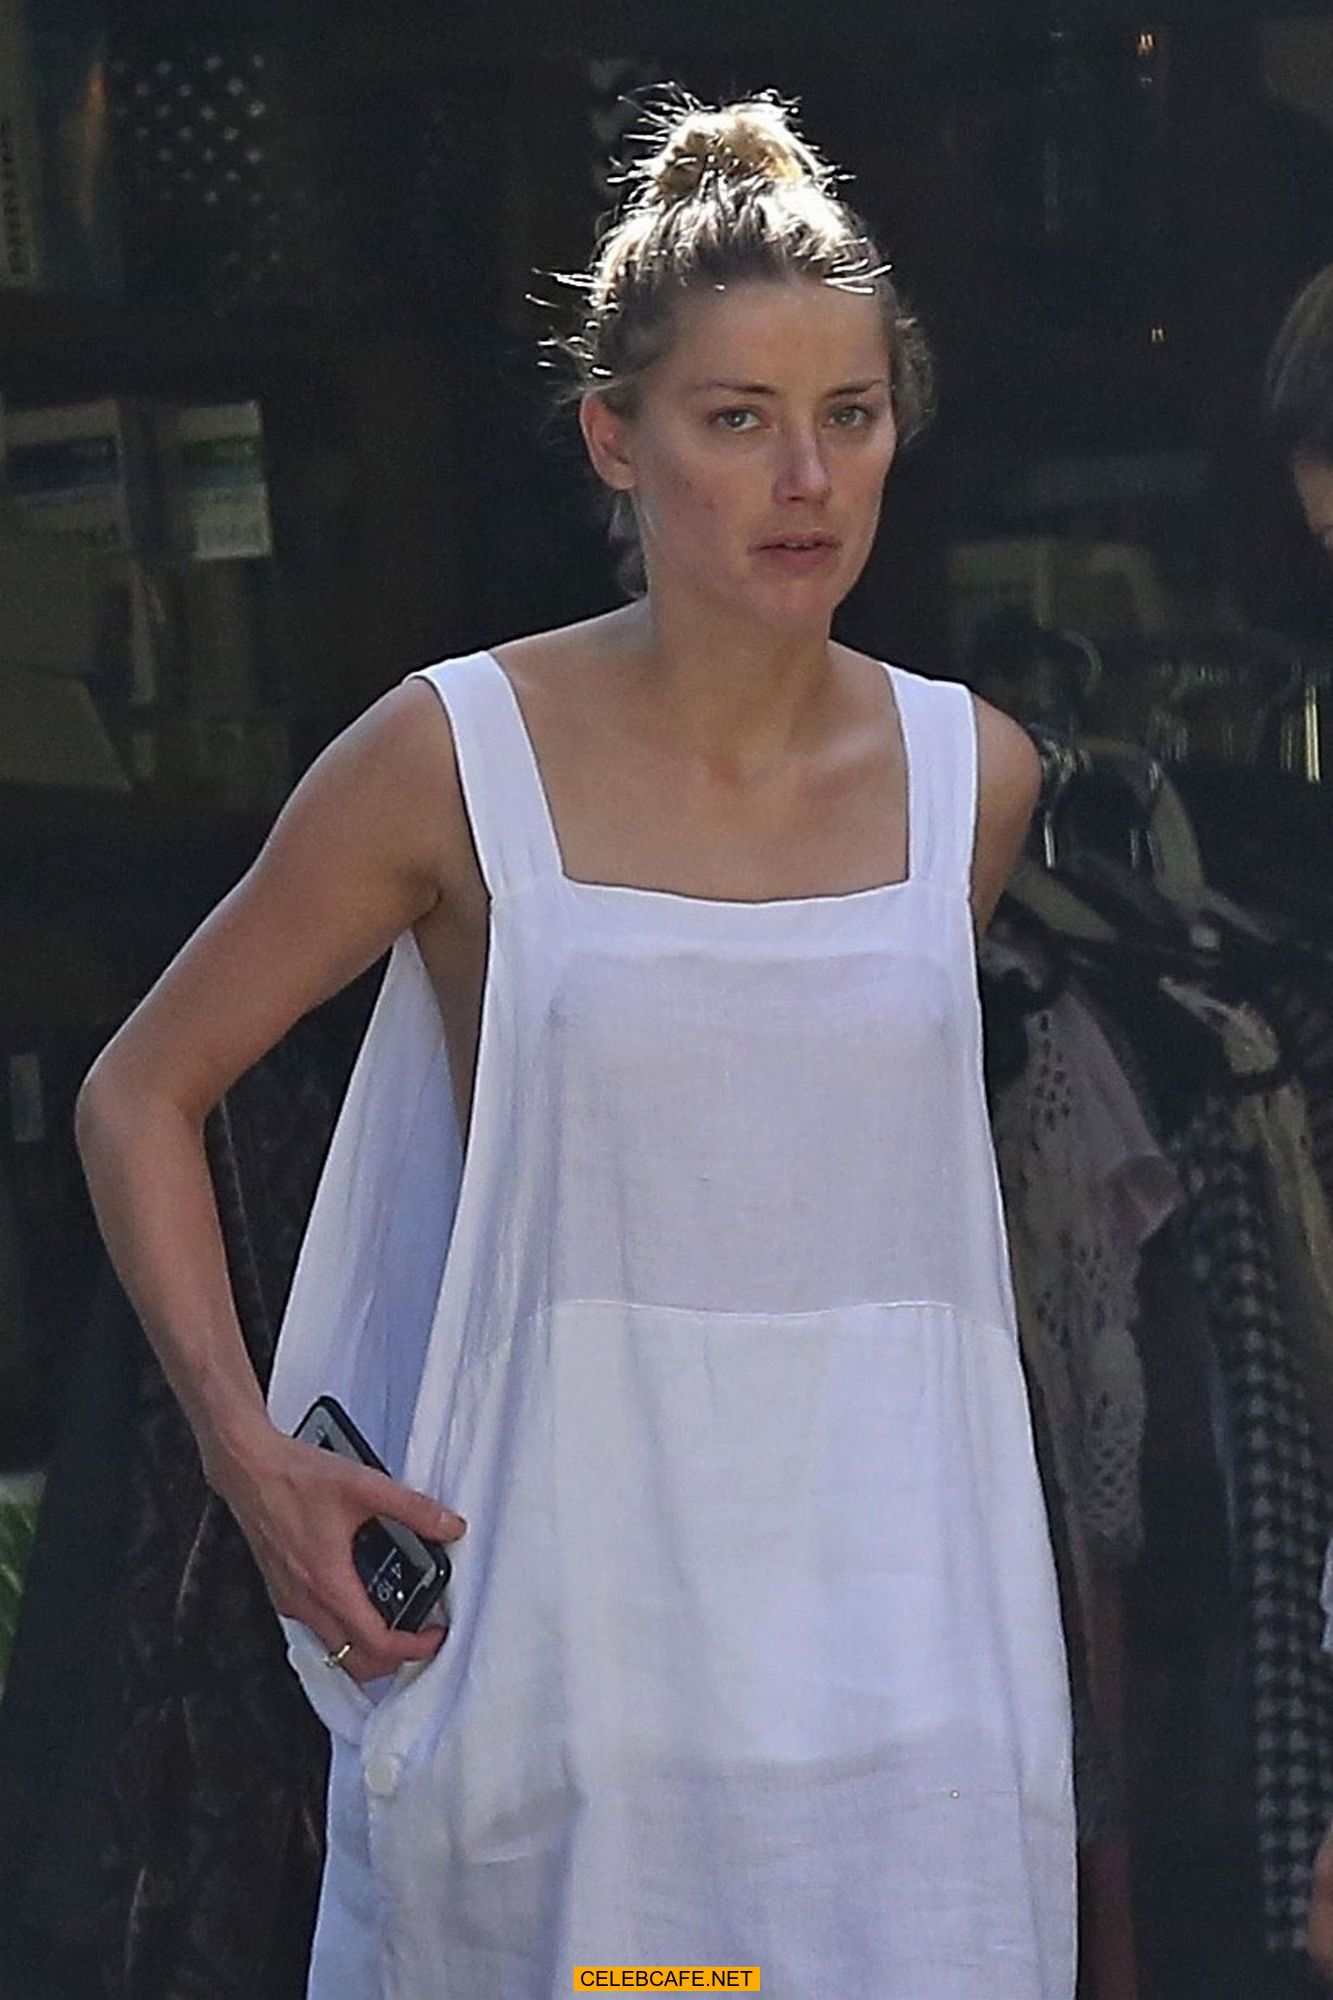 amber_heard_has_a_nip-slip_while_cleaning_out_her_garage_in_la_07302018_3.jpg